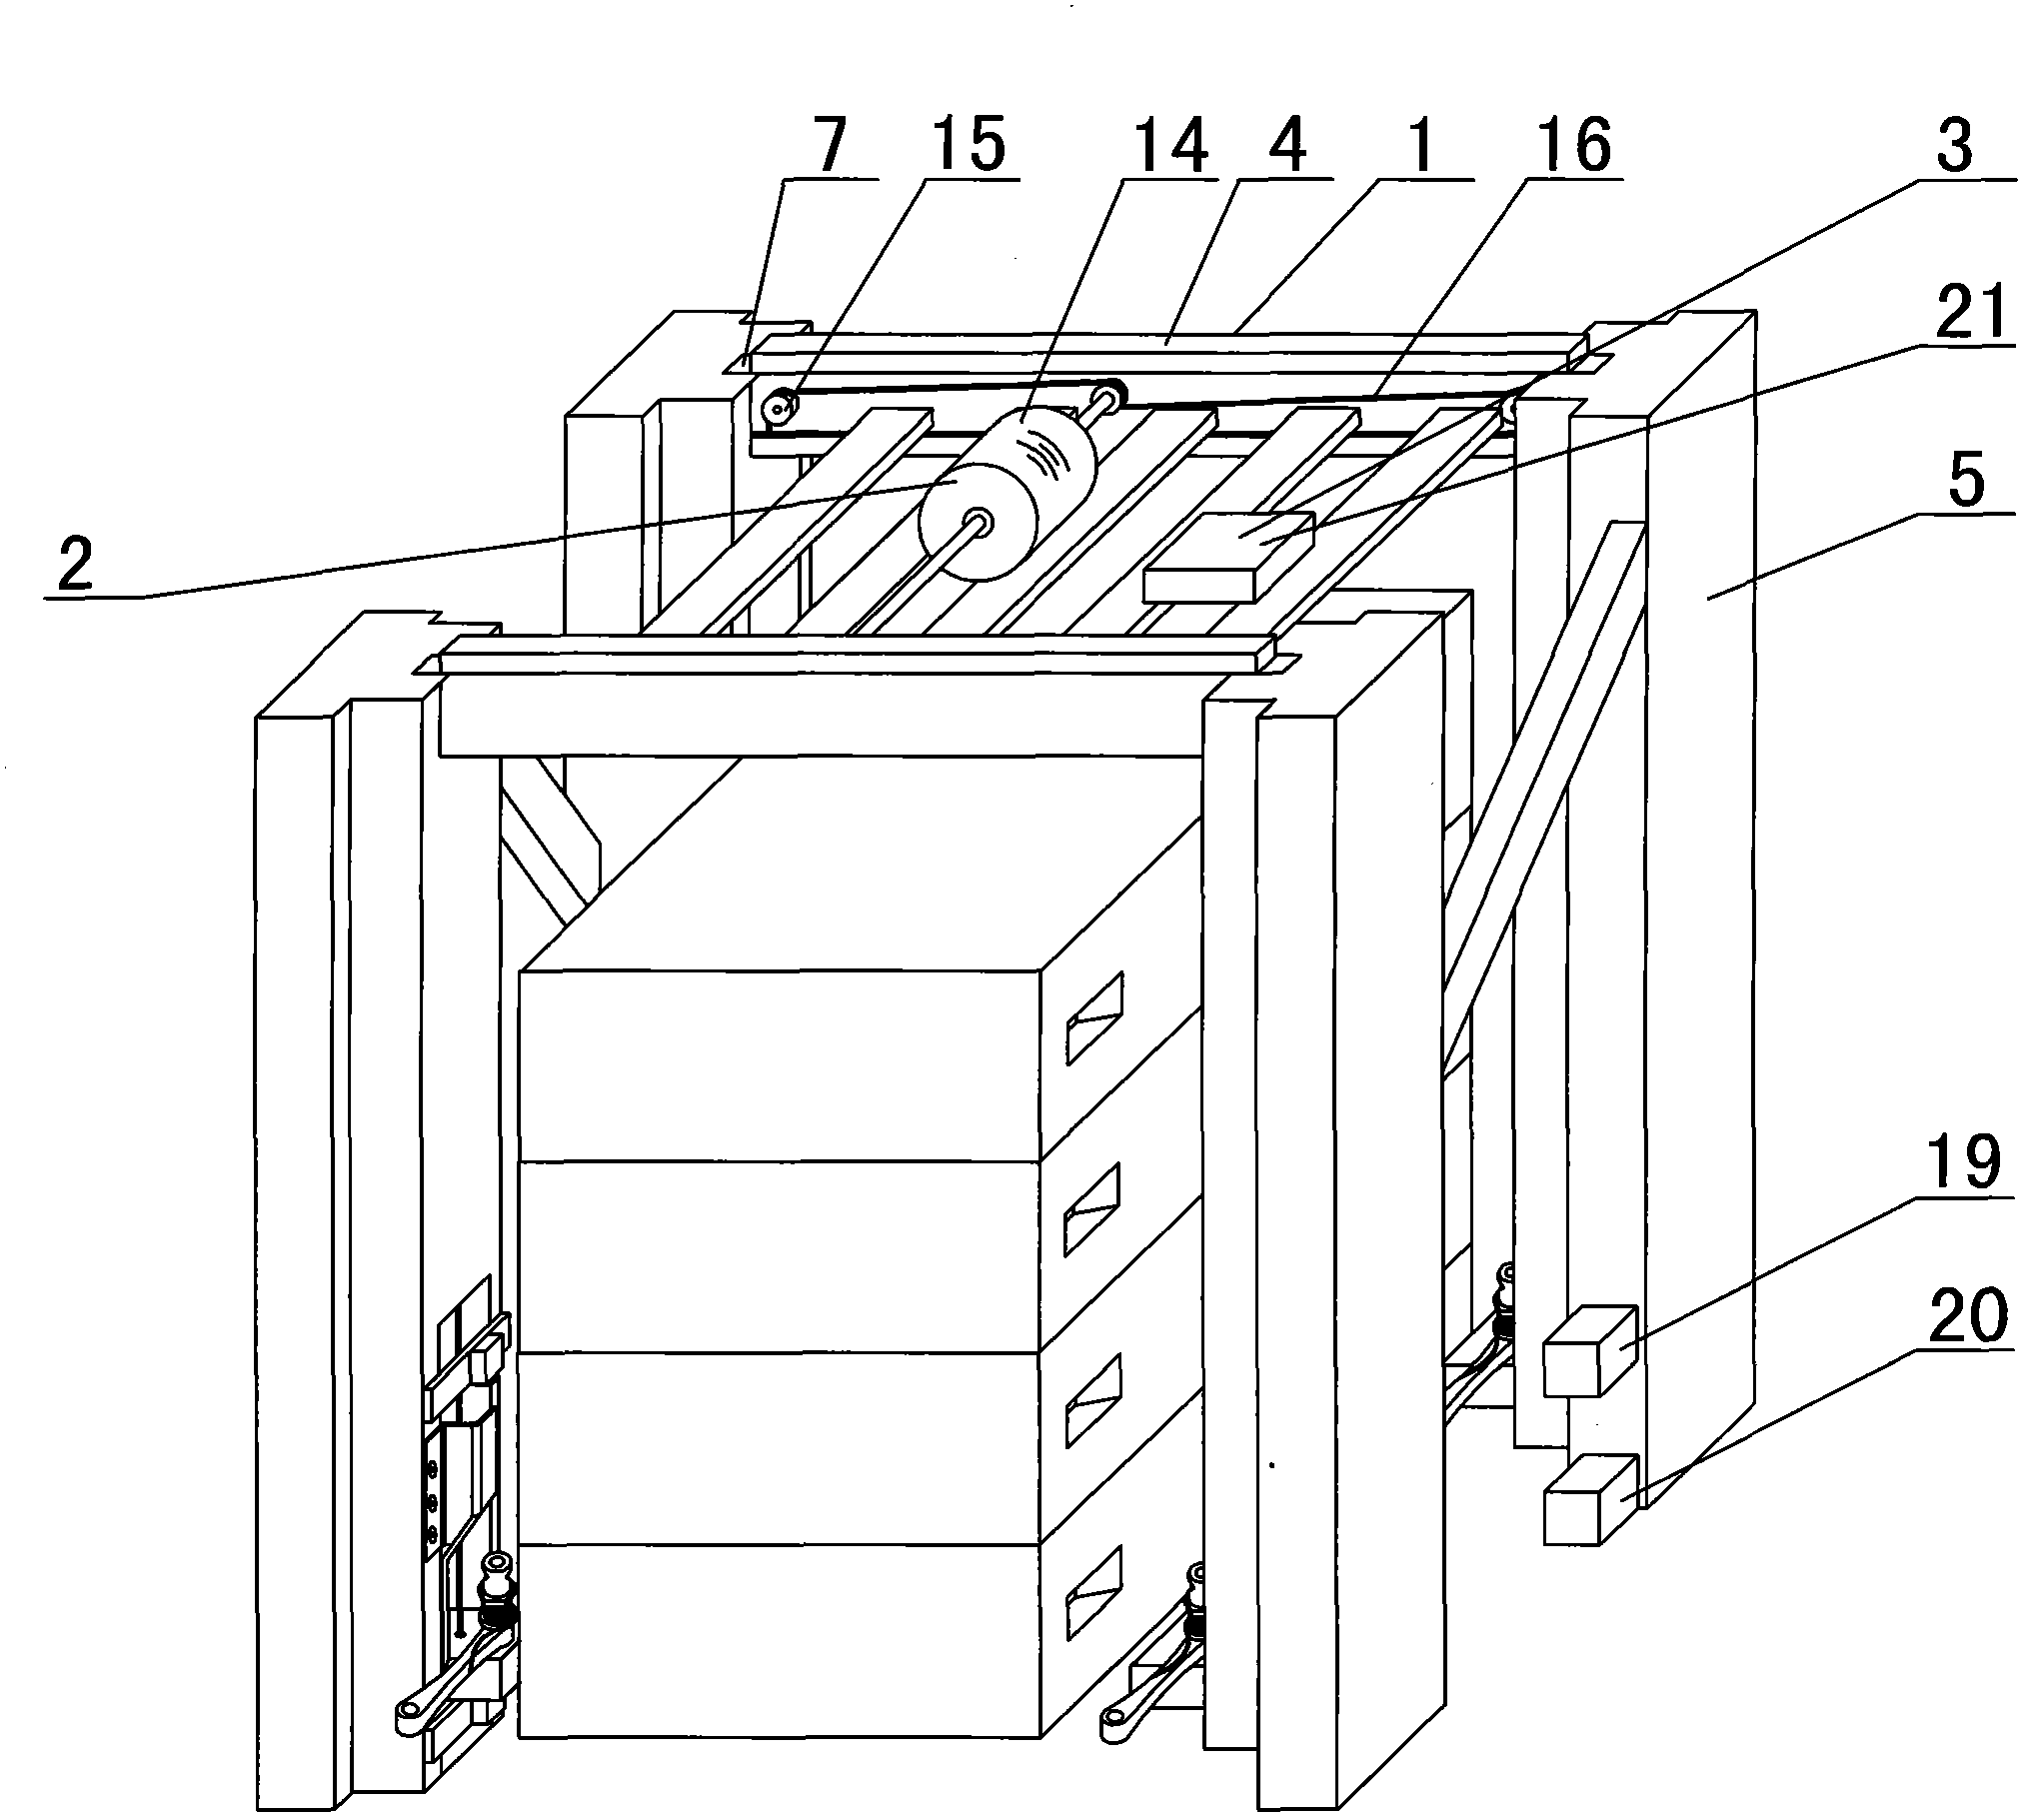 Physical distribution tray stacking support